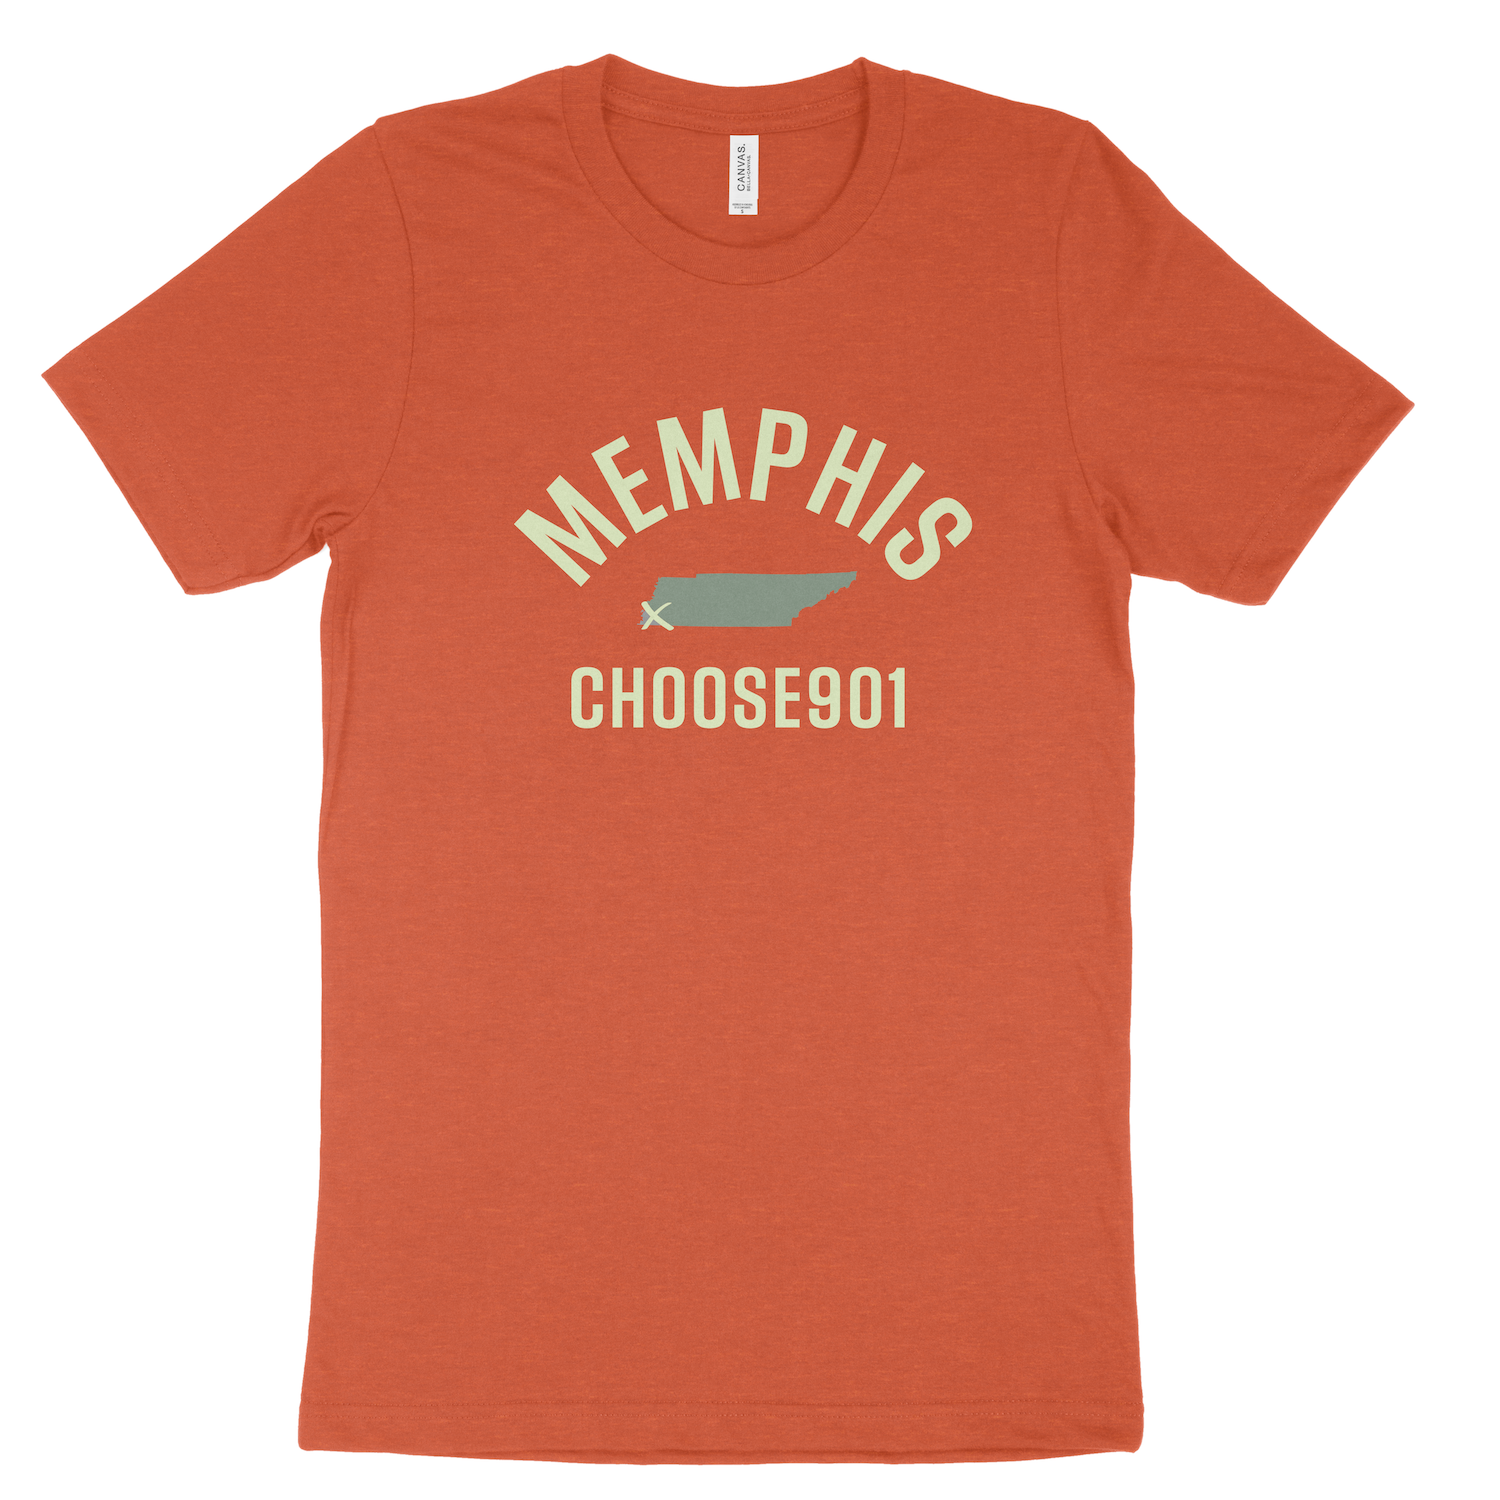 A burnt orange Memphis x Choose901 shirt with the words "Choose901 Memphis" printed in green and white.